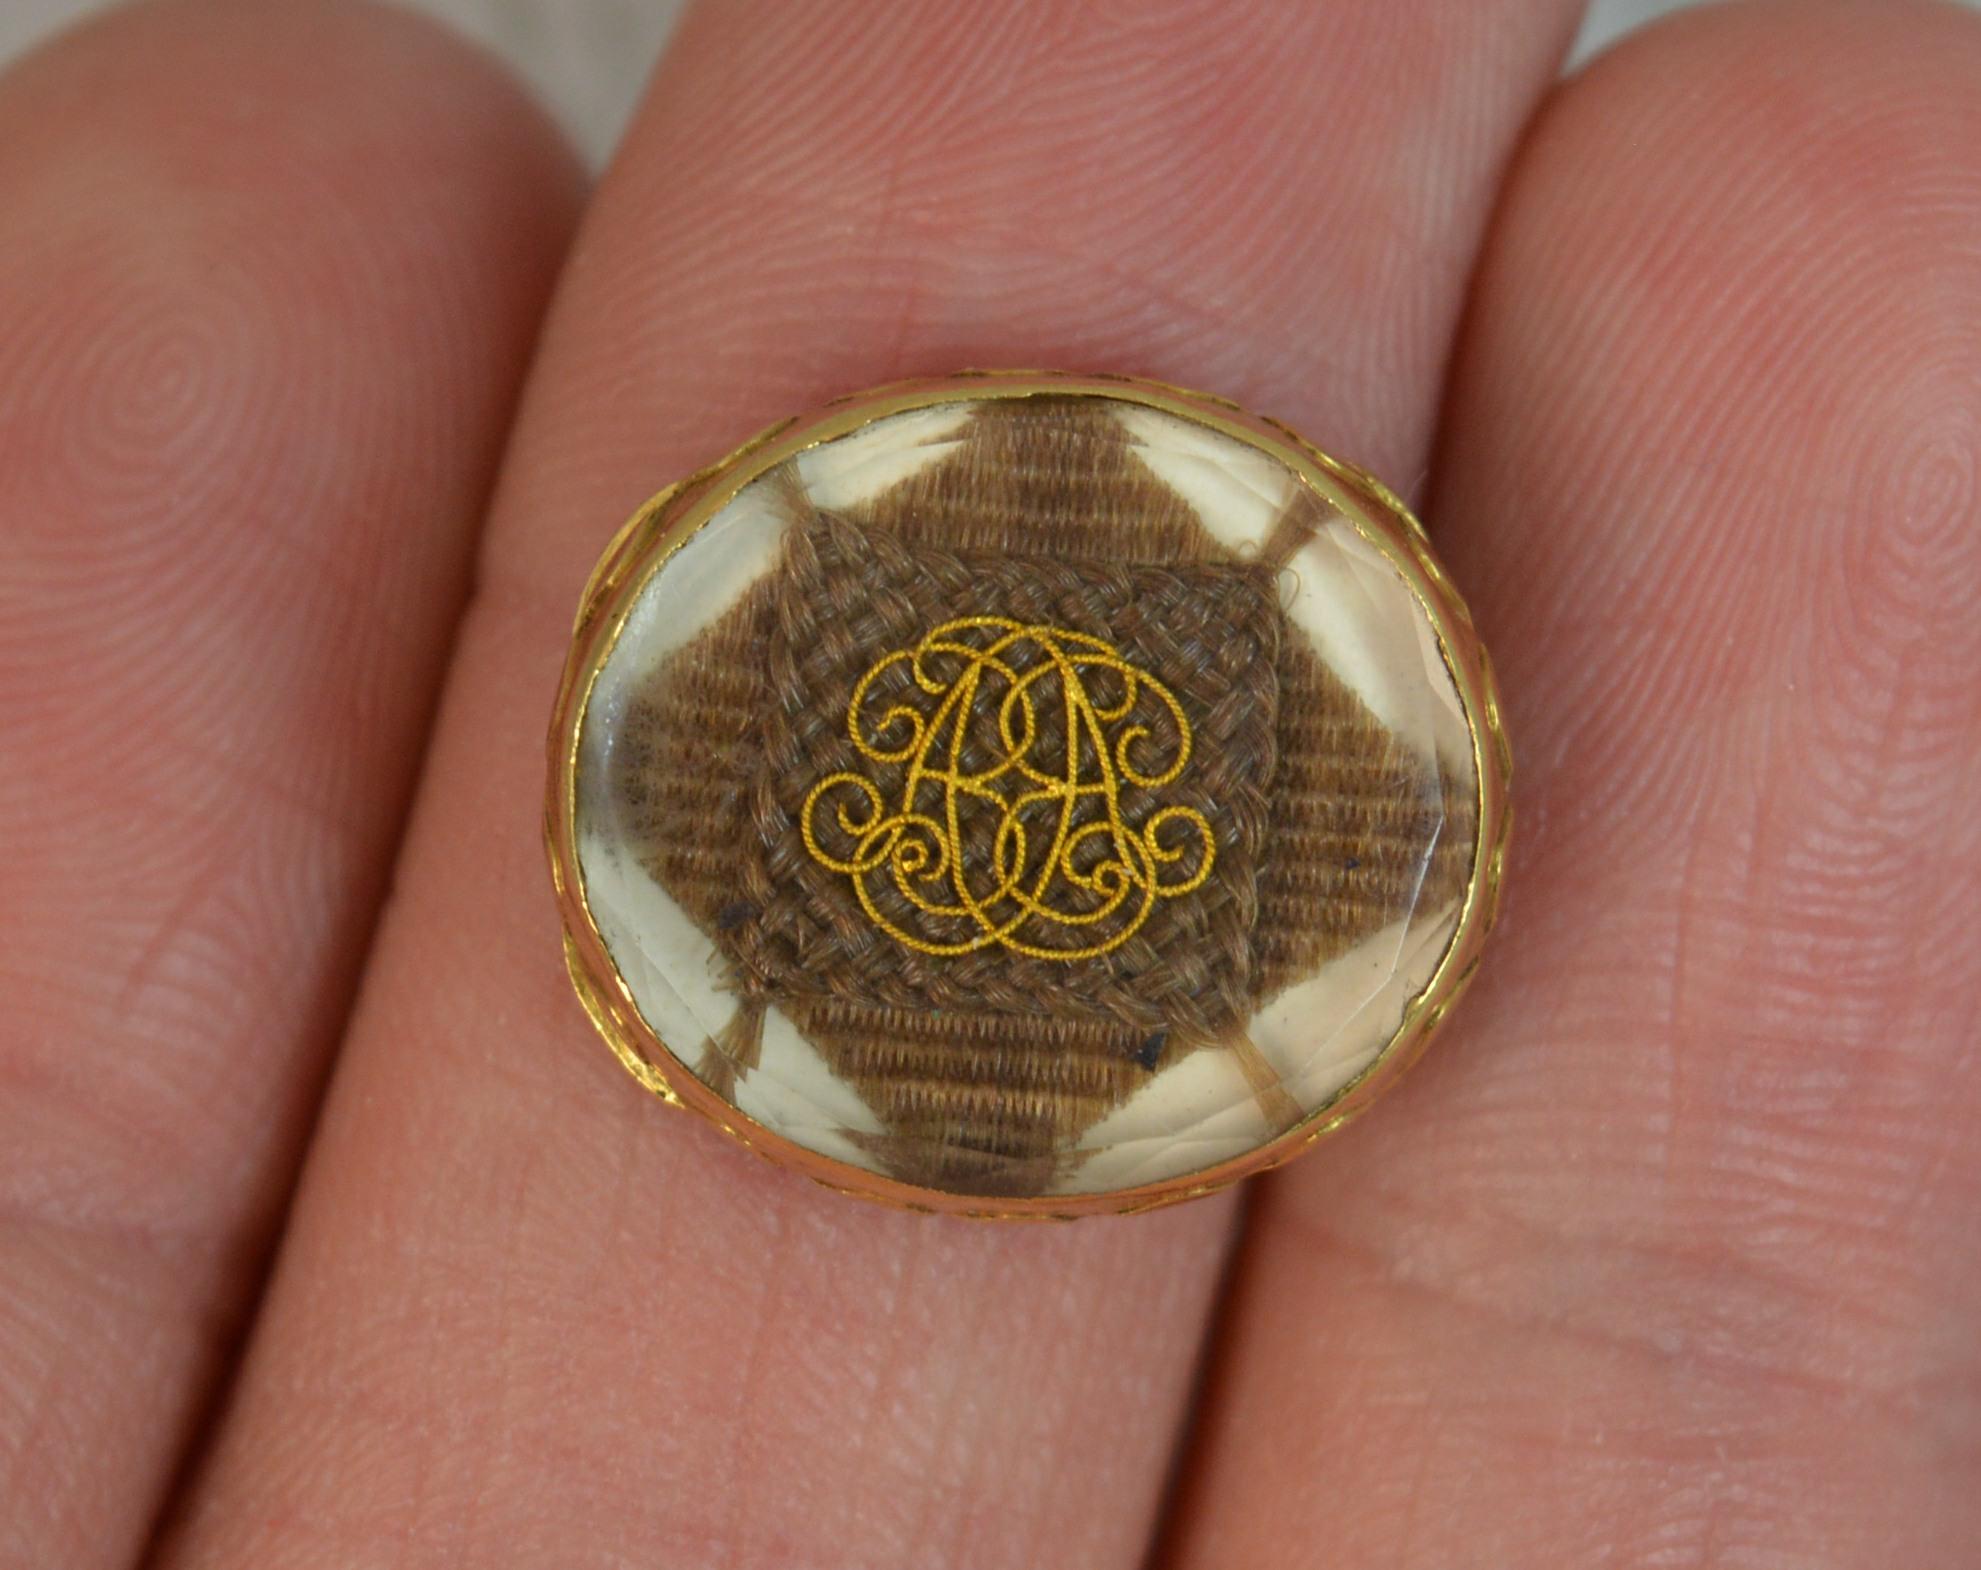 A stunning true early Georgian era Stuart Crystal mourning slider.
Original order in 15 carat yellow gold. Slider bars and plain reverse. The front houses what looks to be AA initials over braided hair.
The mystique of the crystals is embedded in